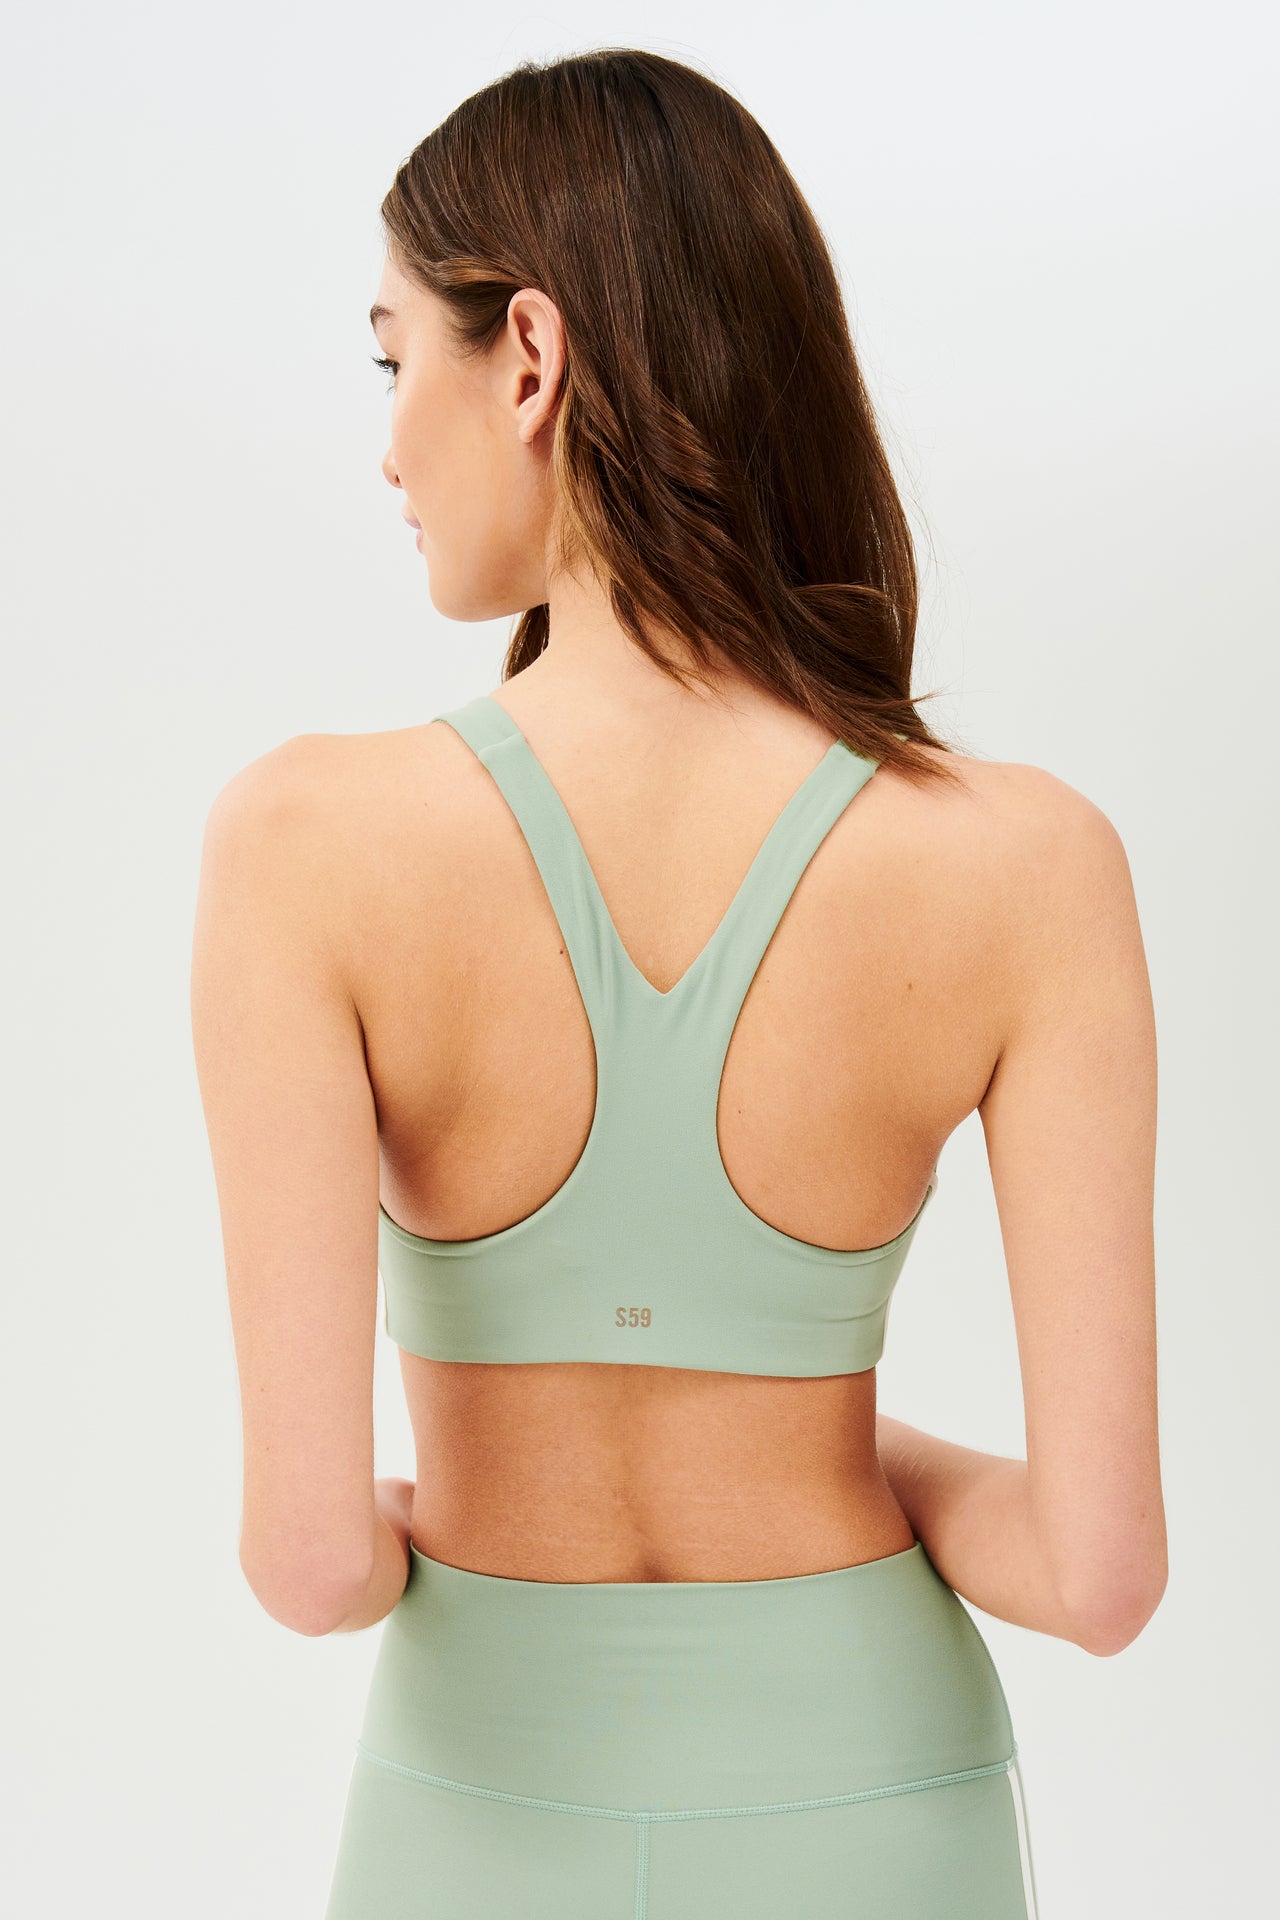 Back view of girl wearing light green sports bra with two thin white stripes down the side and light green leggings 